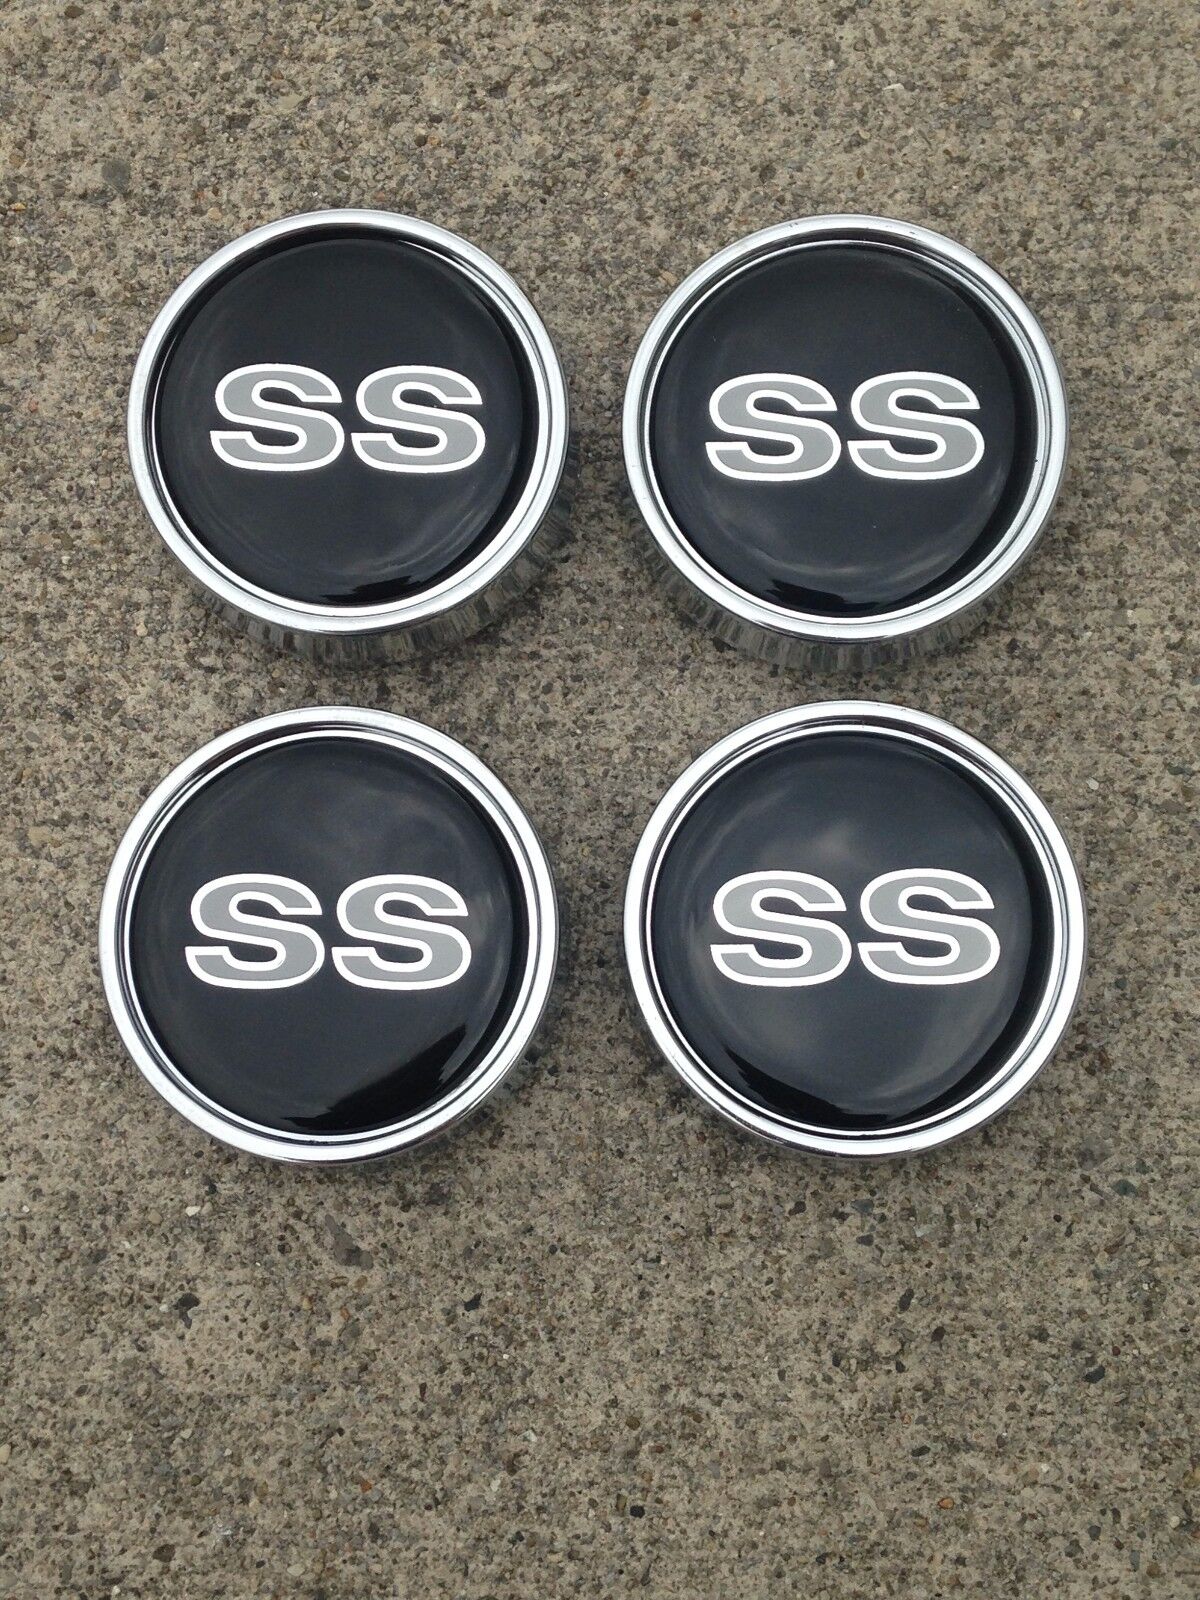 1986 - 1988 New Monte Carlo SS Center Caps Set of 4 with Silver SS Letters